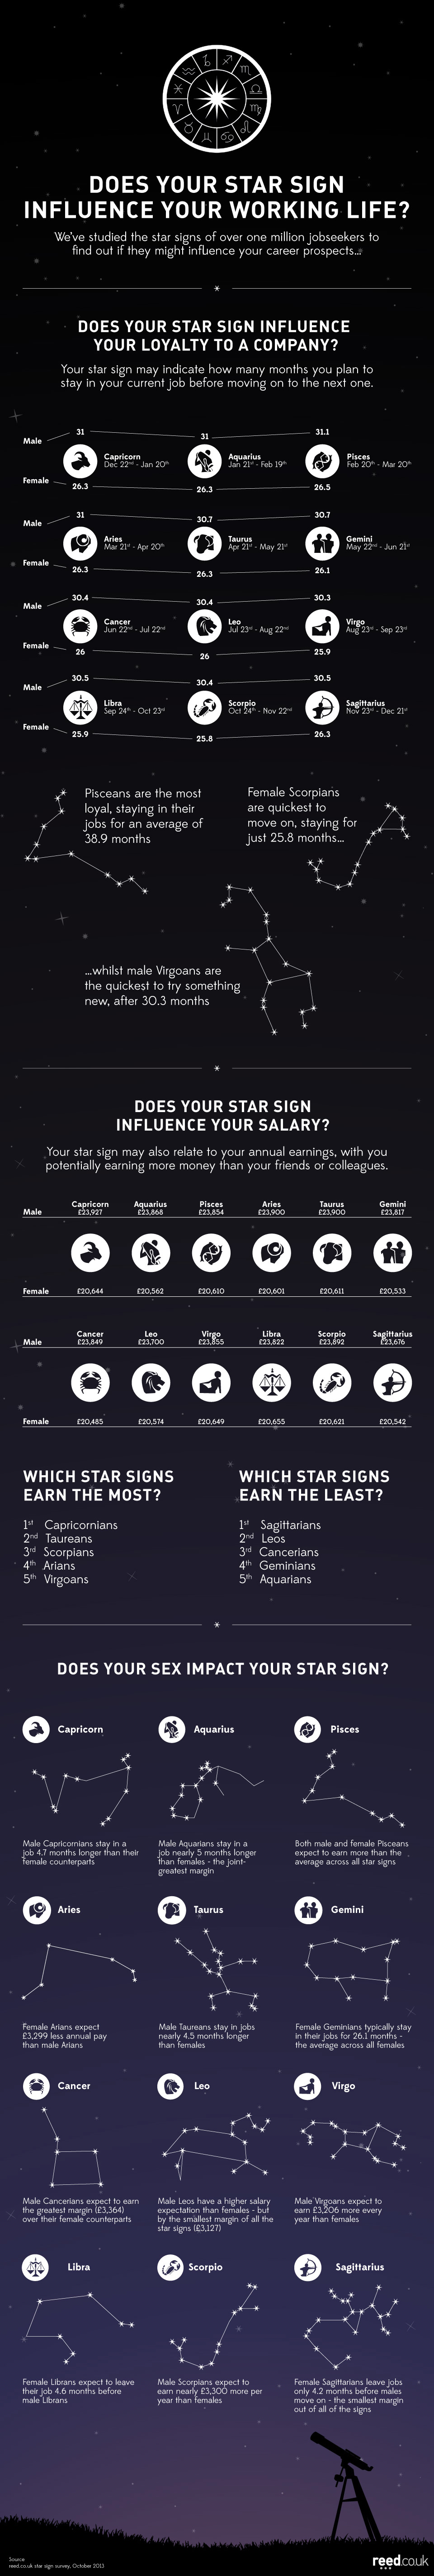 Does Your Star Sign Influence Your Working Life?